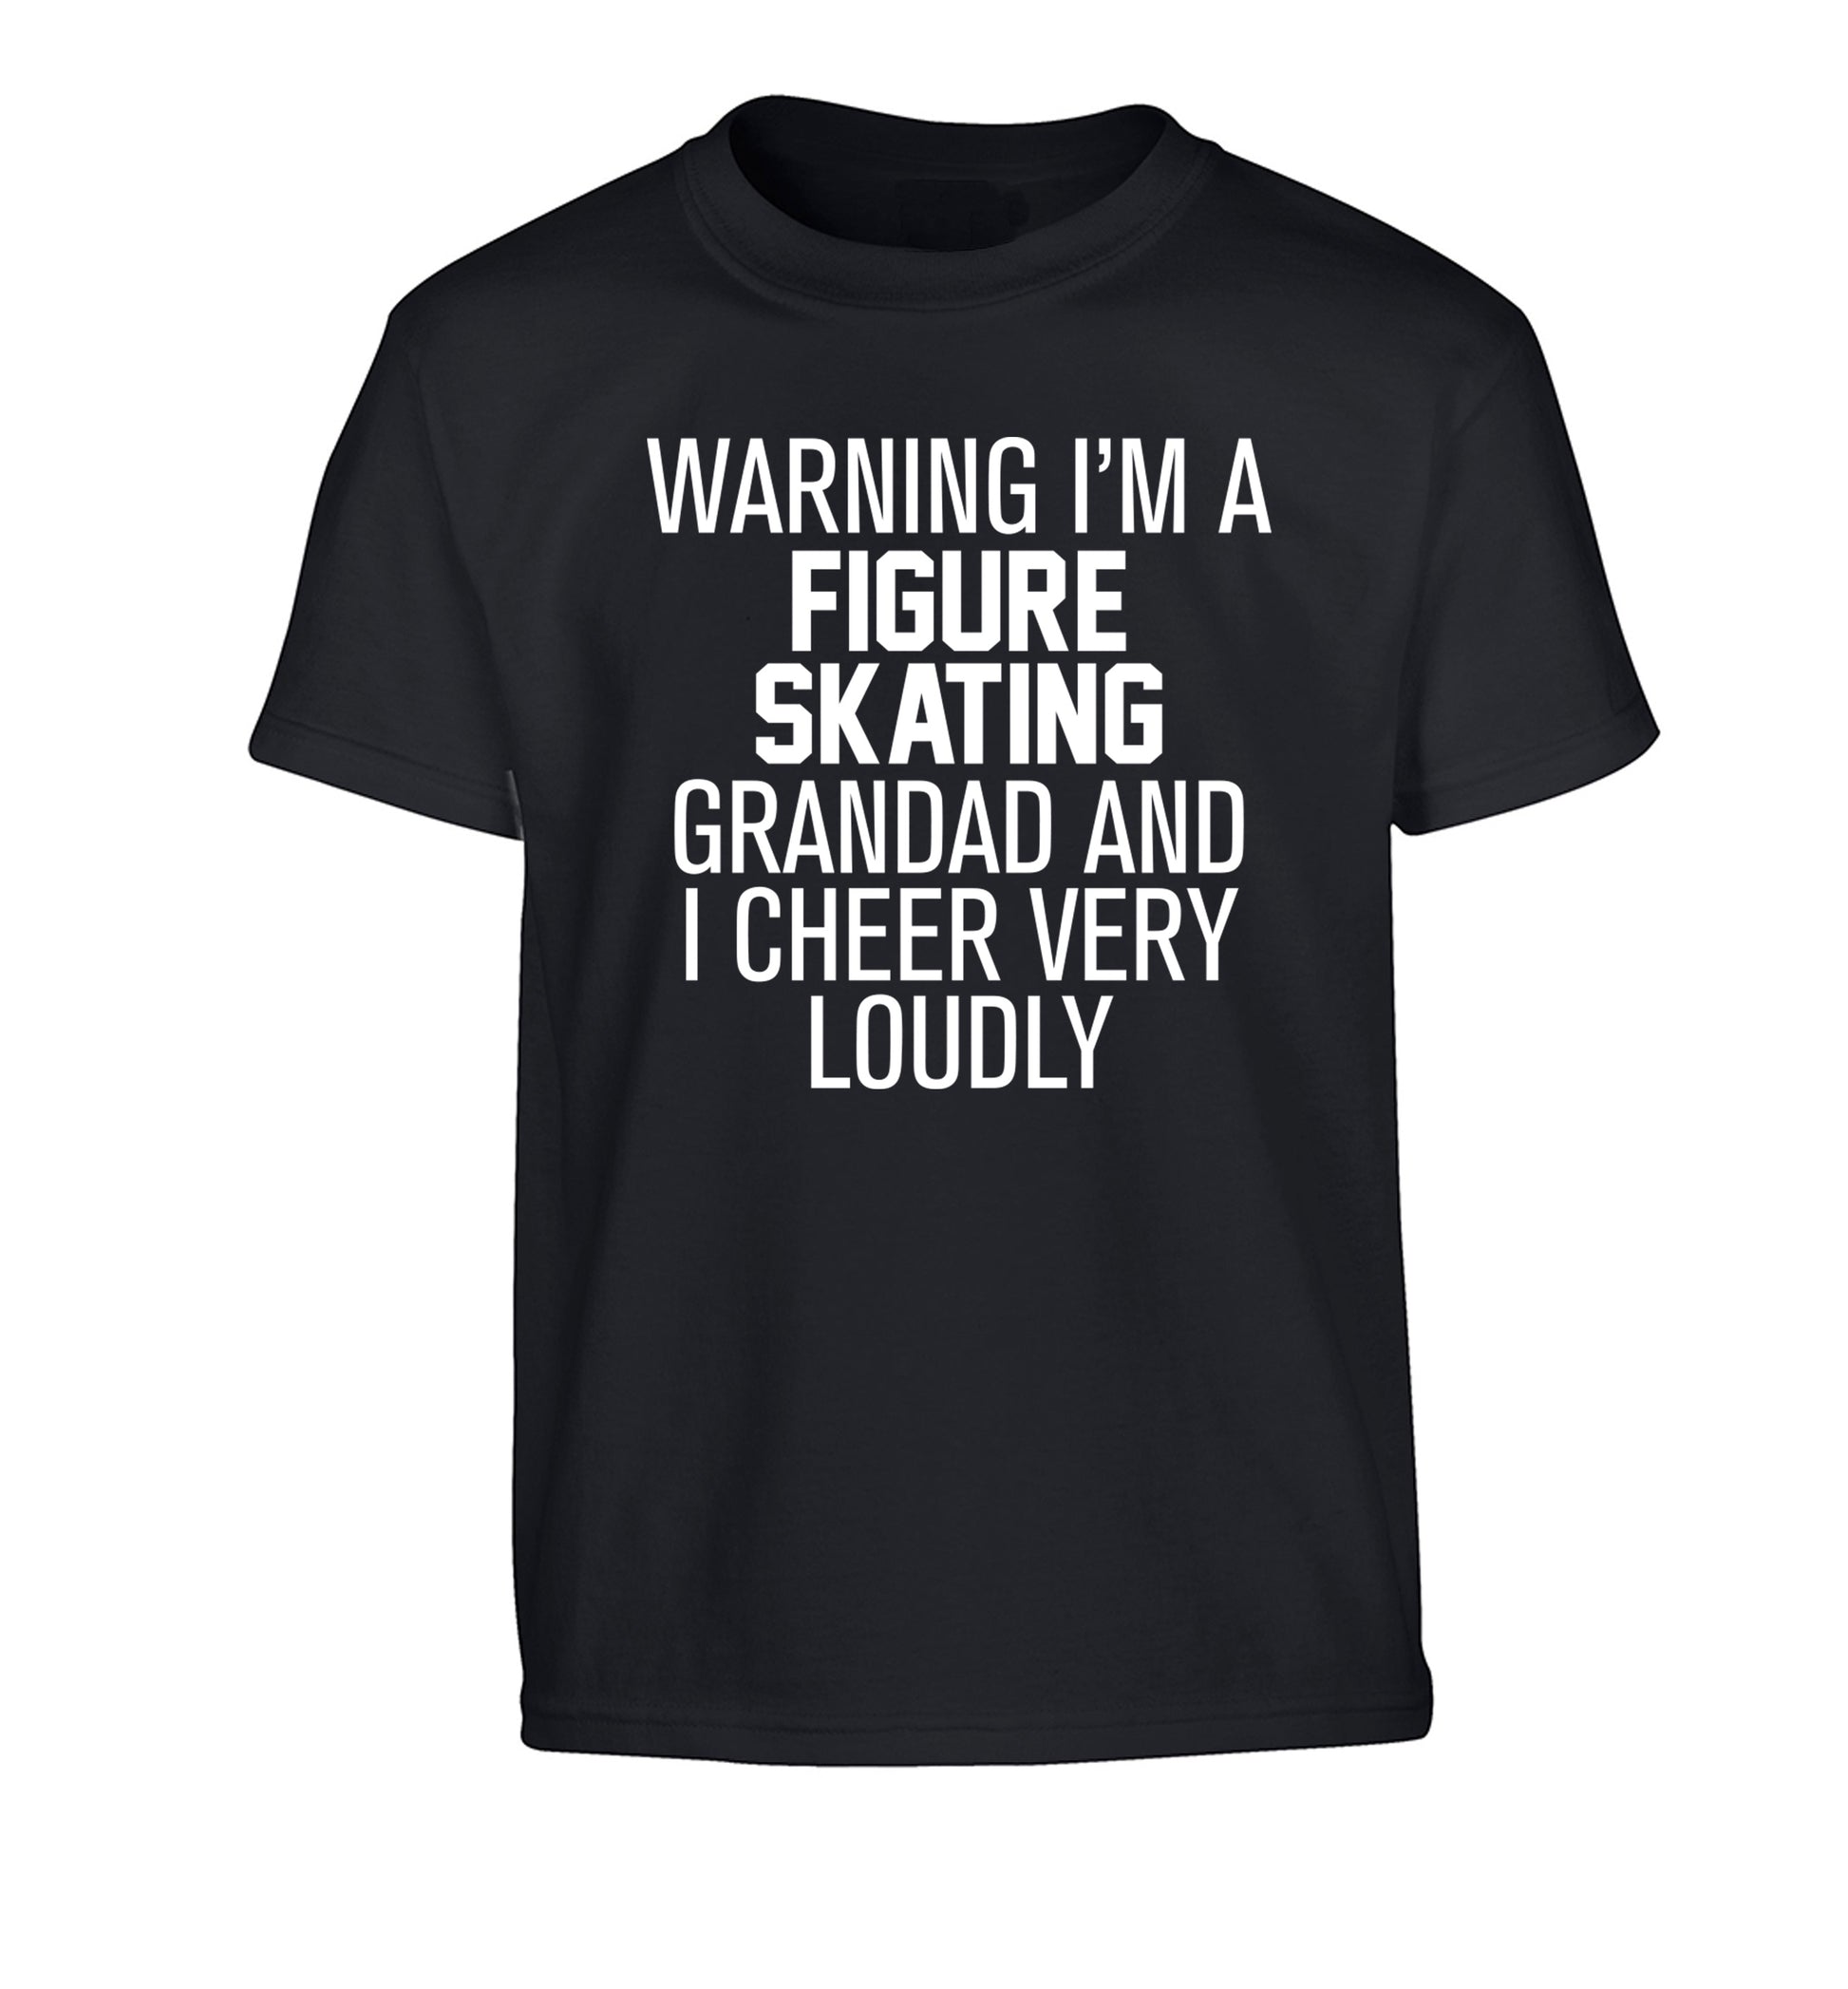 Warning I'm a figure skating grandad and I cheer very loudly Children's black Tshirt 12-14 Years